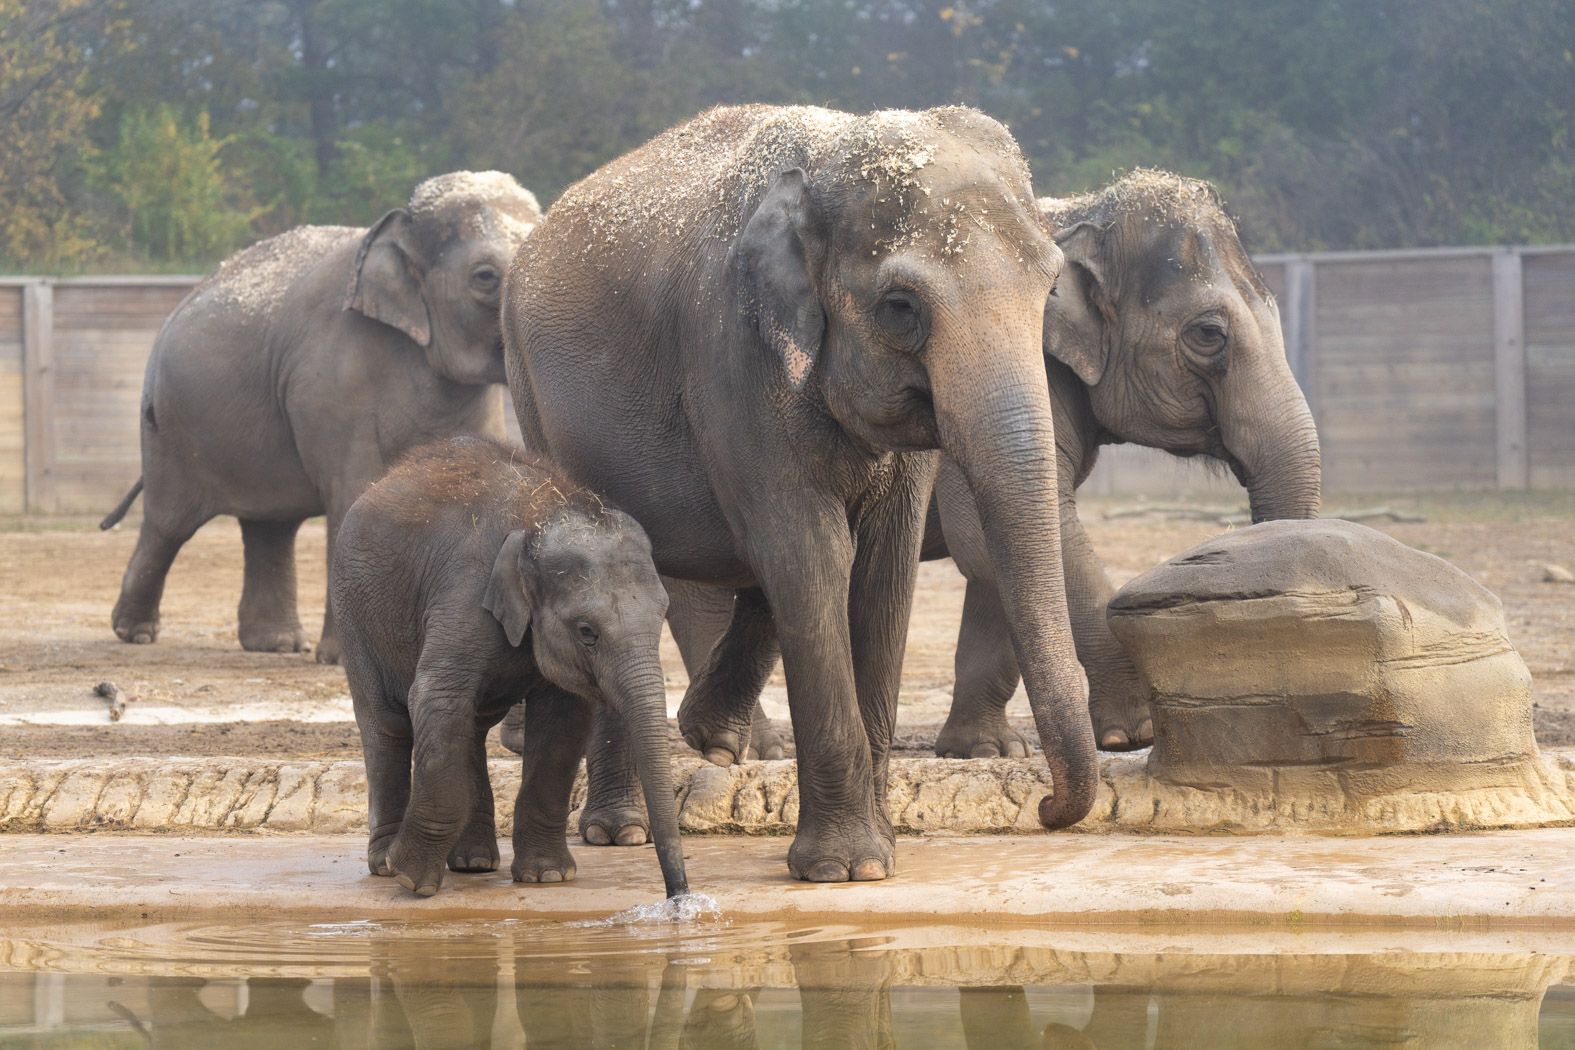 Four of the Columbus Zoo's Asian elephants — a calf and mom and two other females — walk in the yard near water